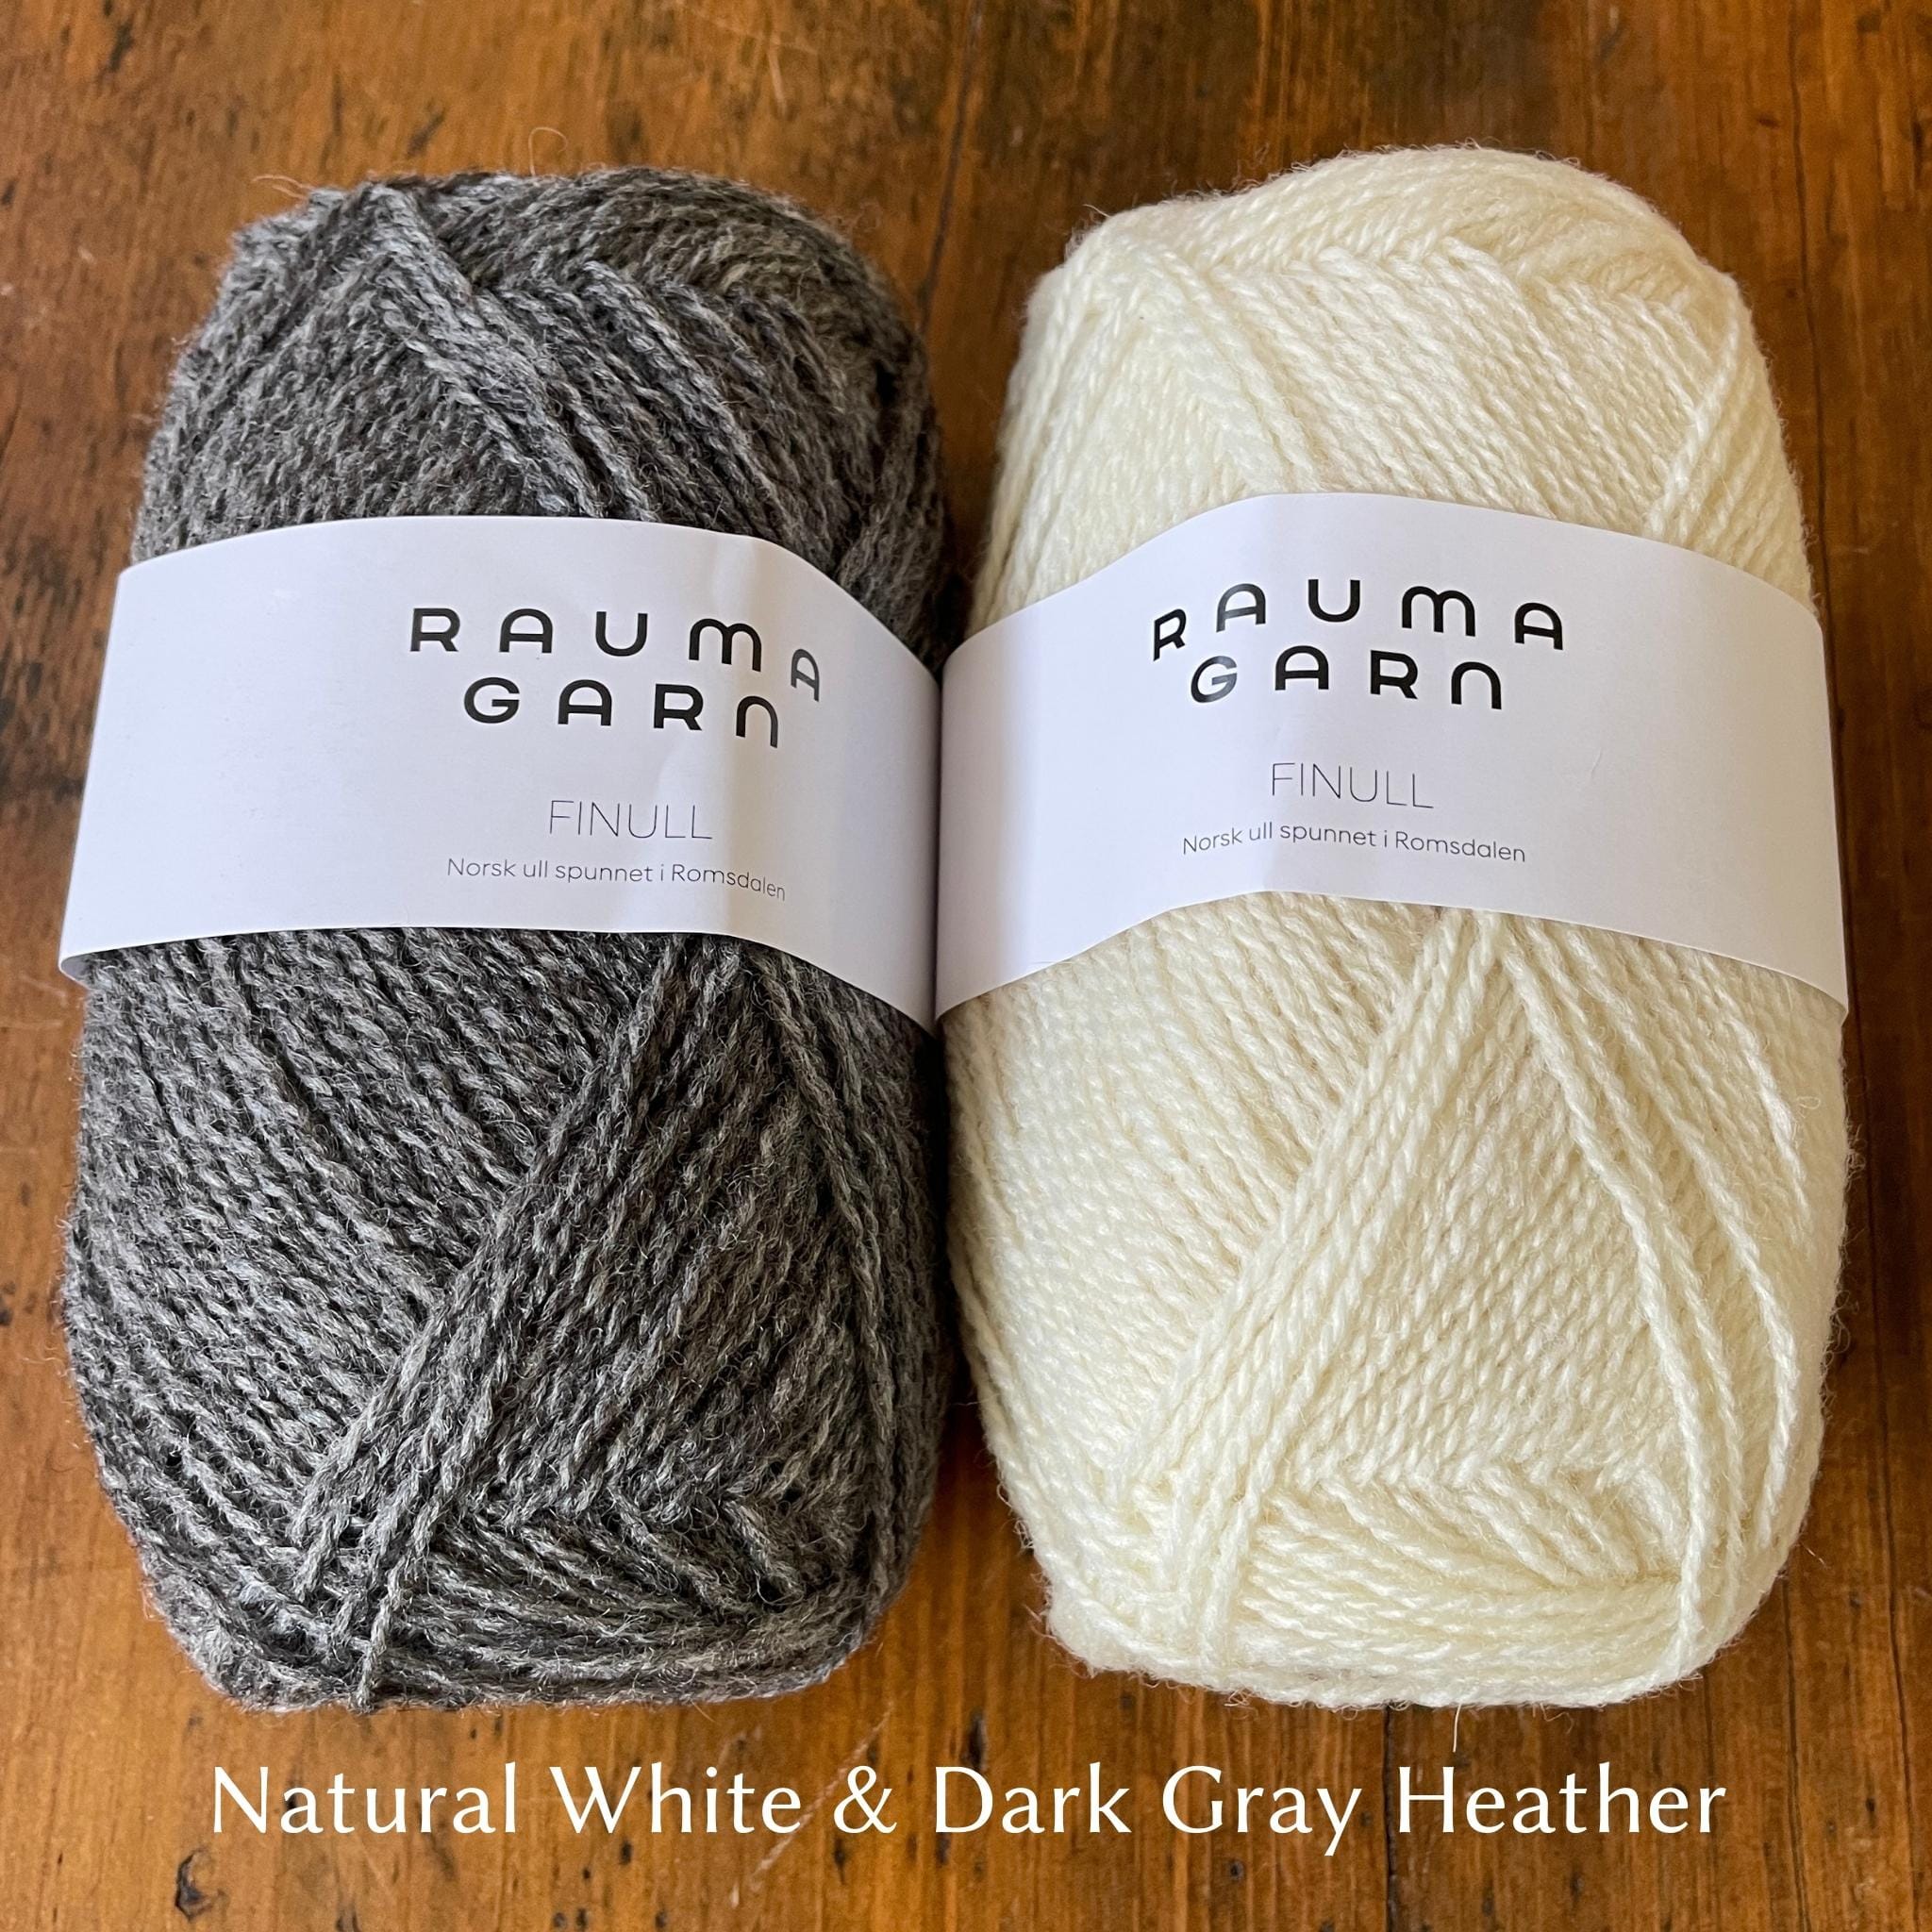 Two balls of Finullgarn yarn; one dark gray heather, one natural white color